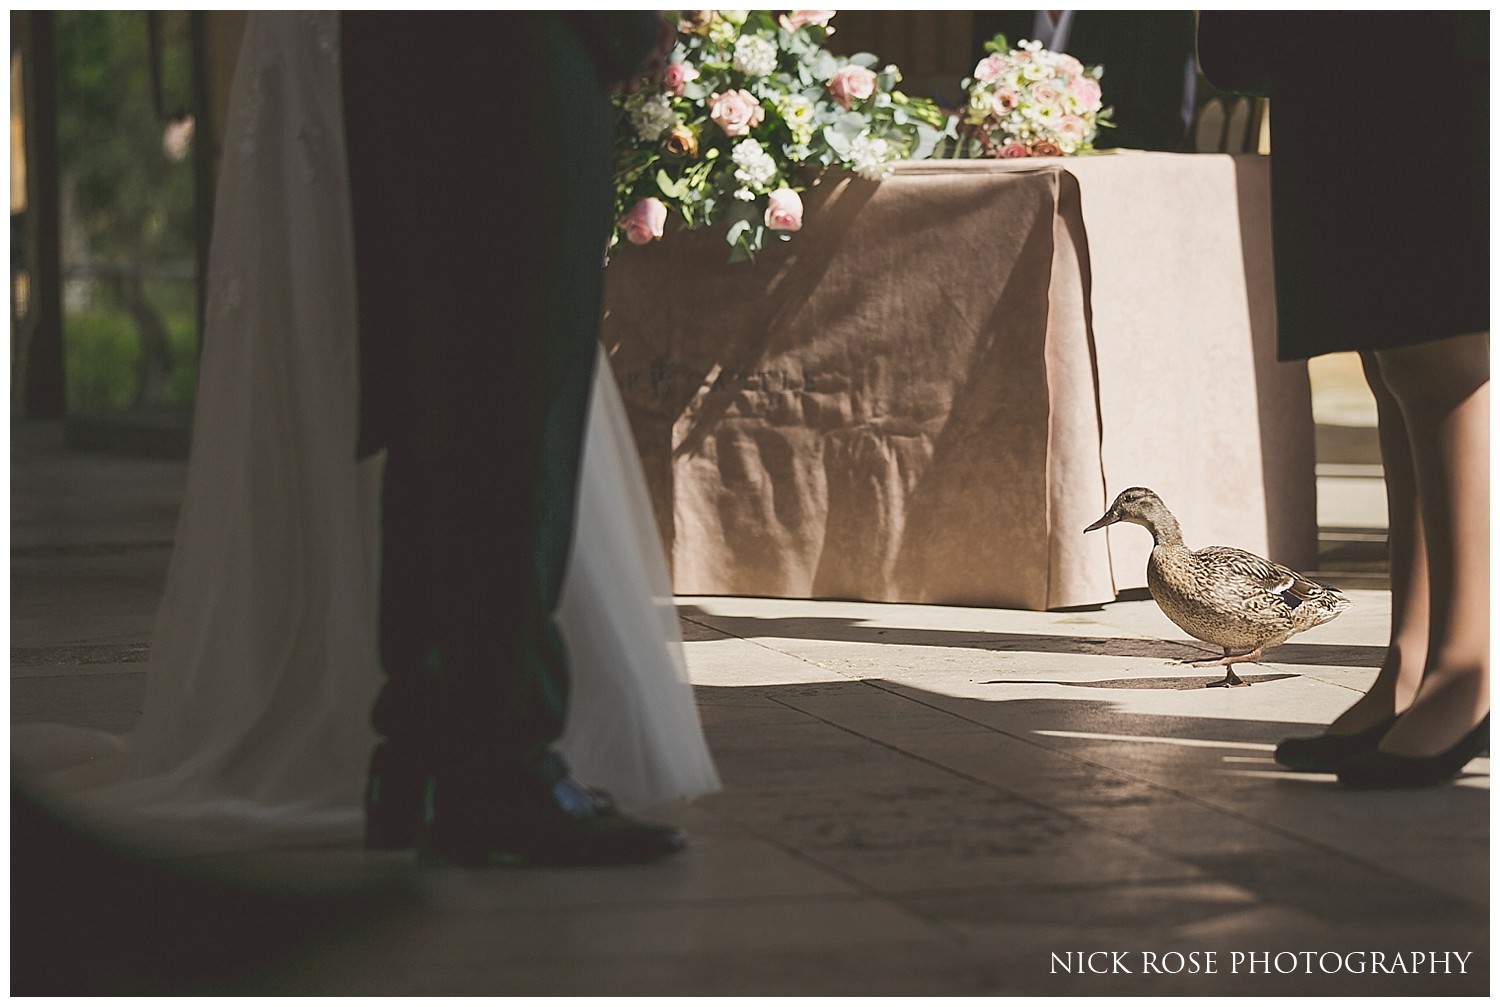  Family of ducks watching a civil wedding ceremony at Hever Castle in Kent 